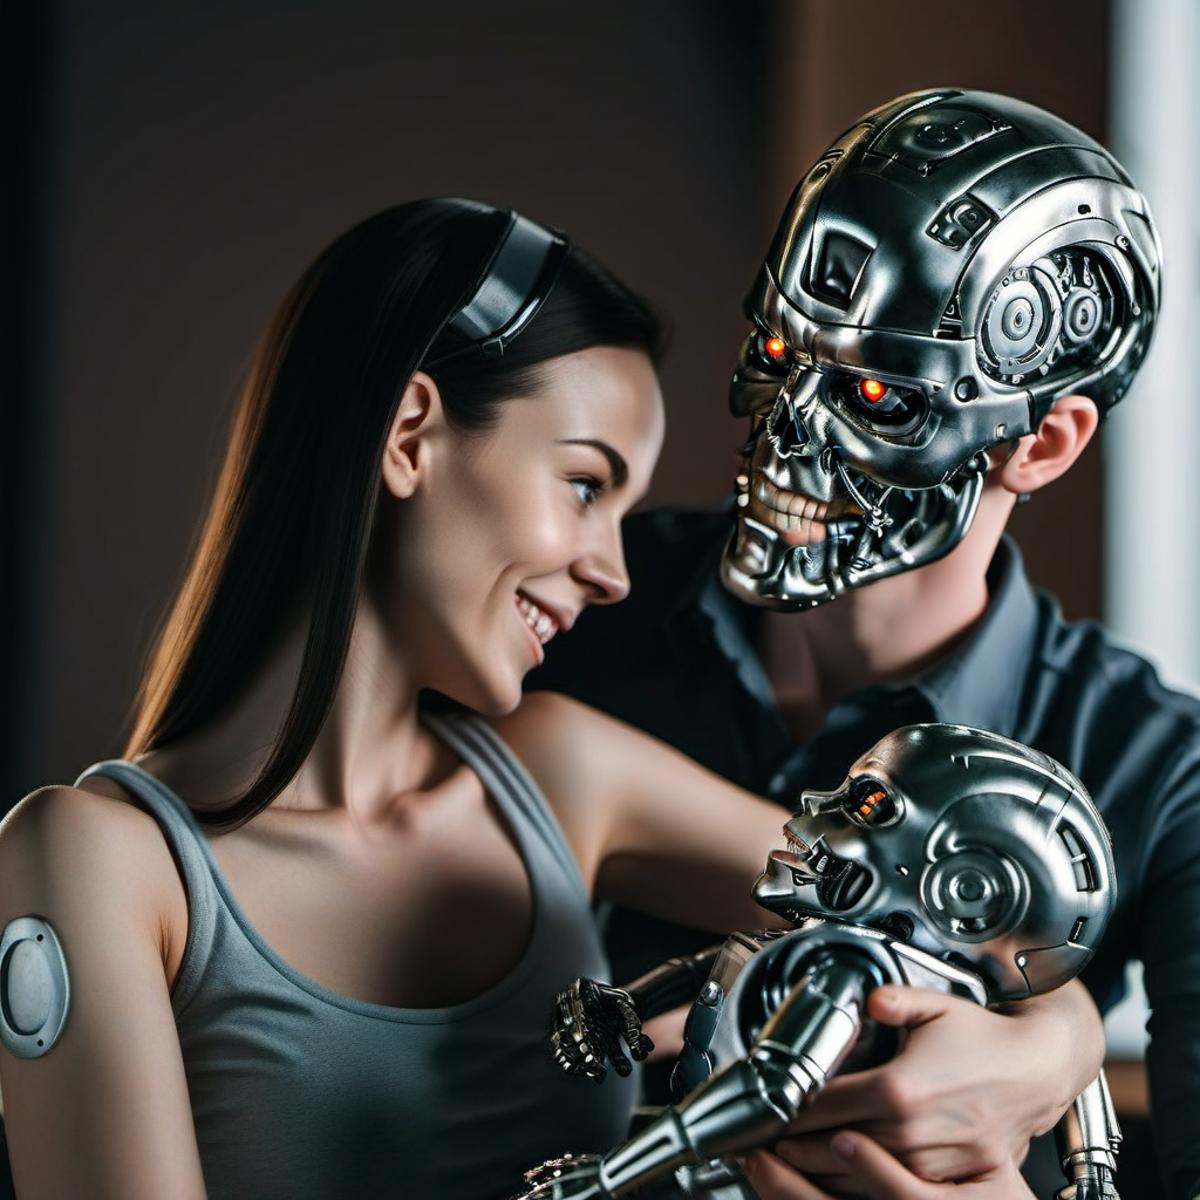 A man and woman holding a baby robot.